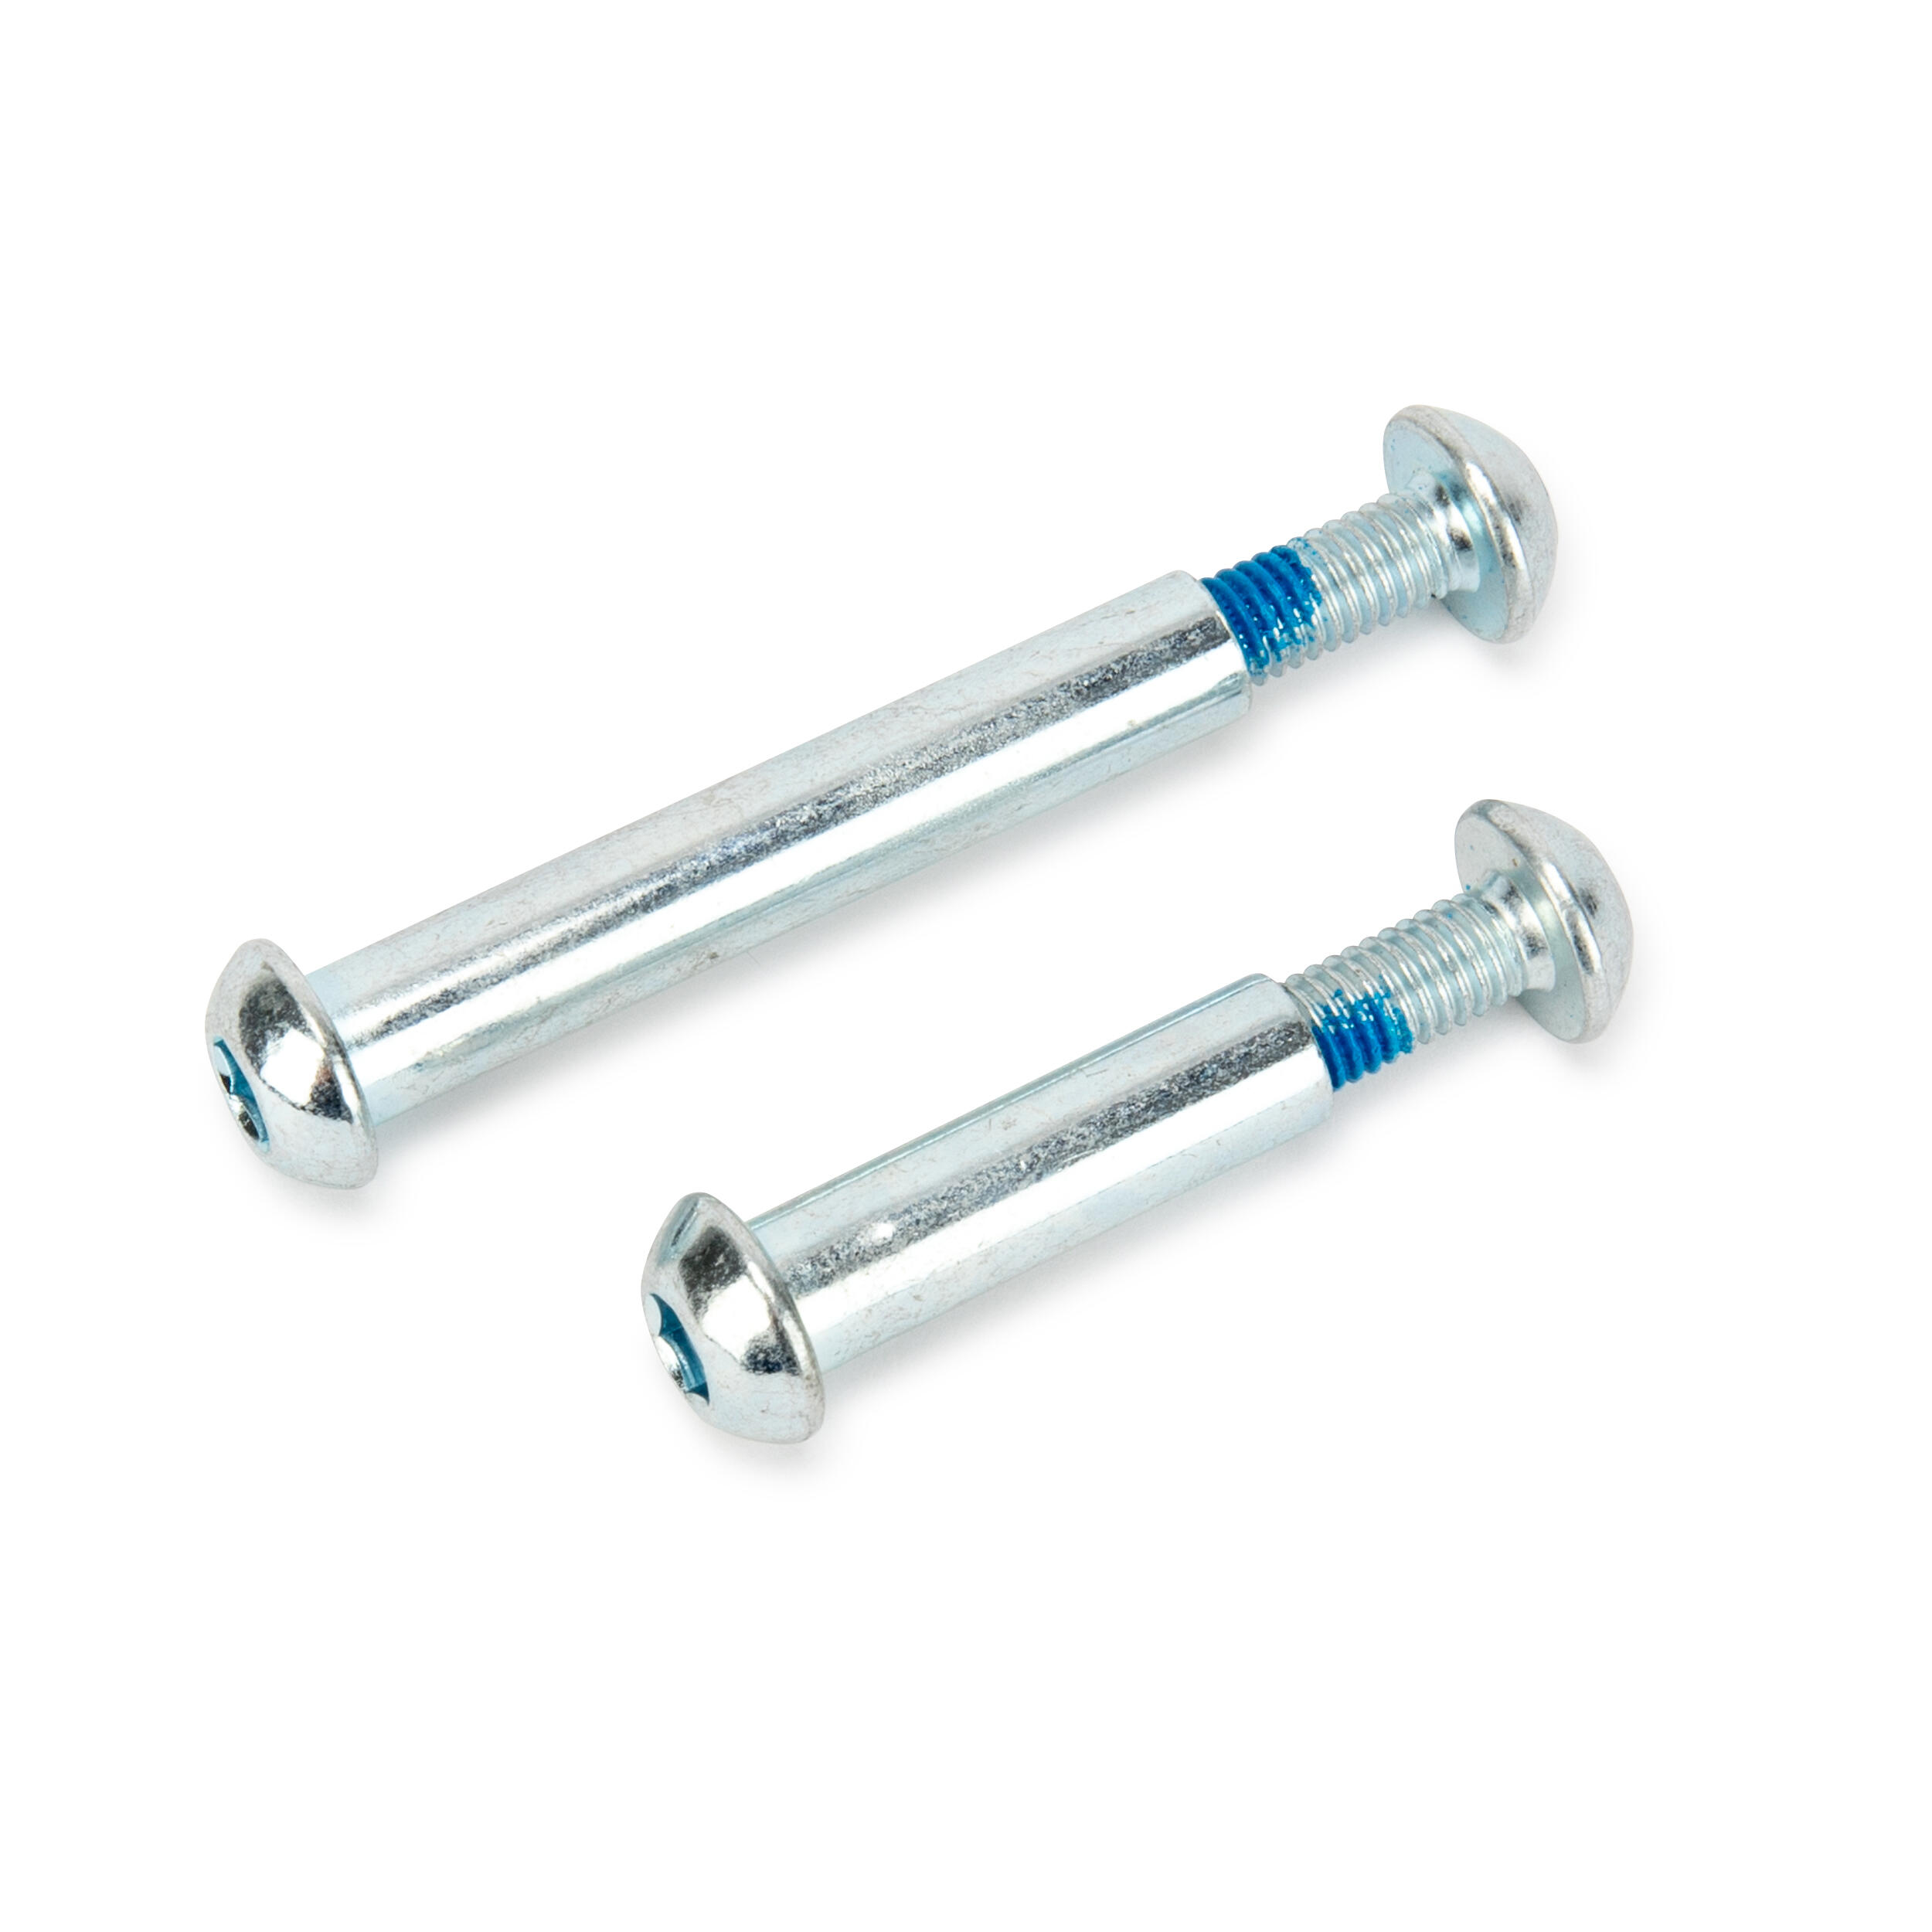 OXELO Front and Rear Wheel Axle Kit for Play5 Scooters